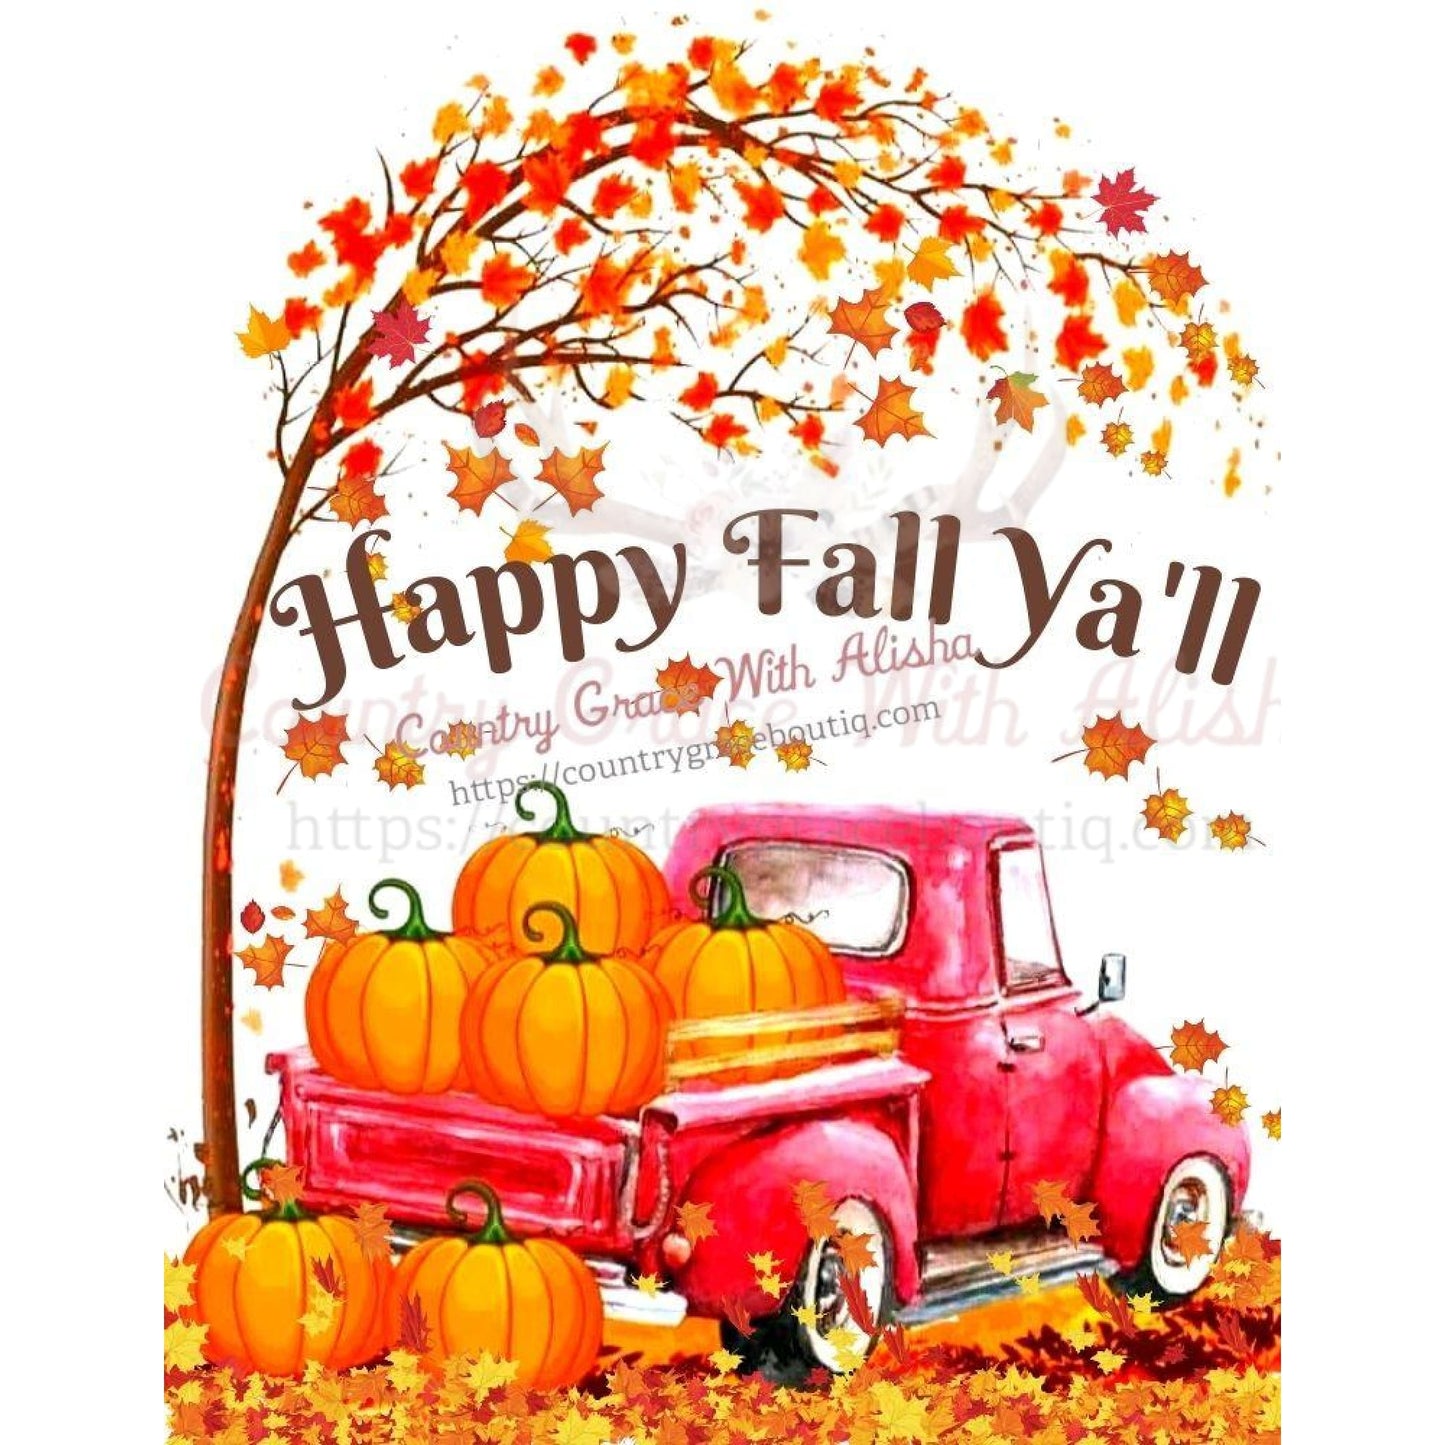 Happy Fall Yall Sublimation Transfer - Sub $1.50 Country 